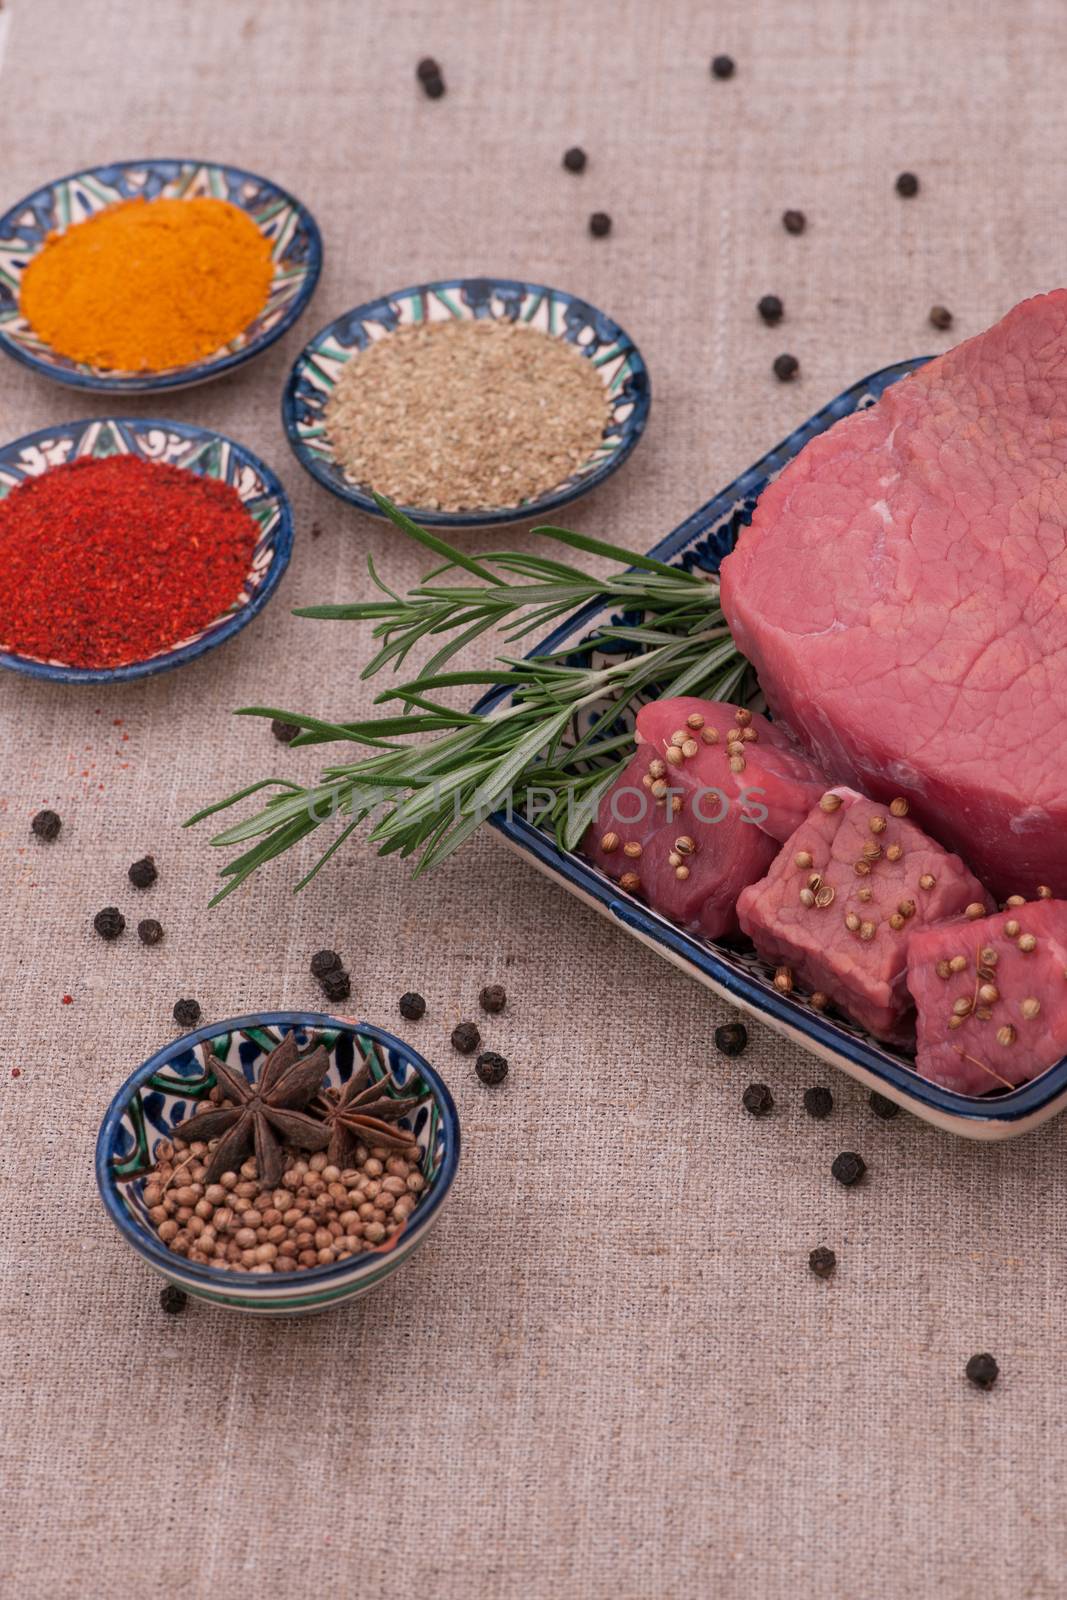 raw meat with spices and herbs in a square plate on a textured tissue